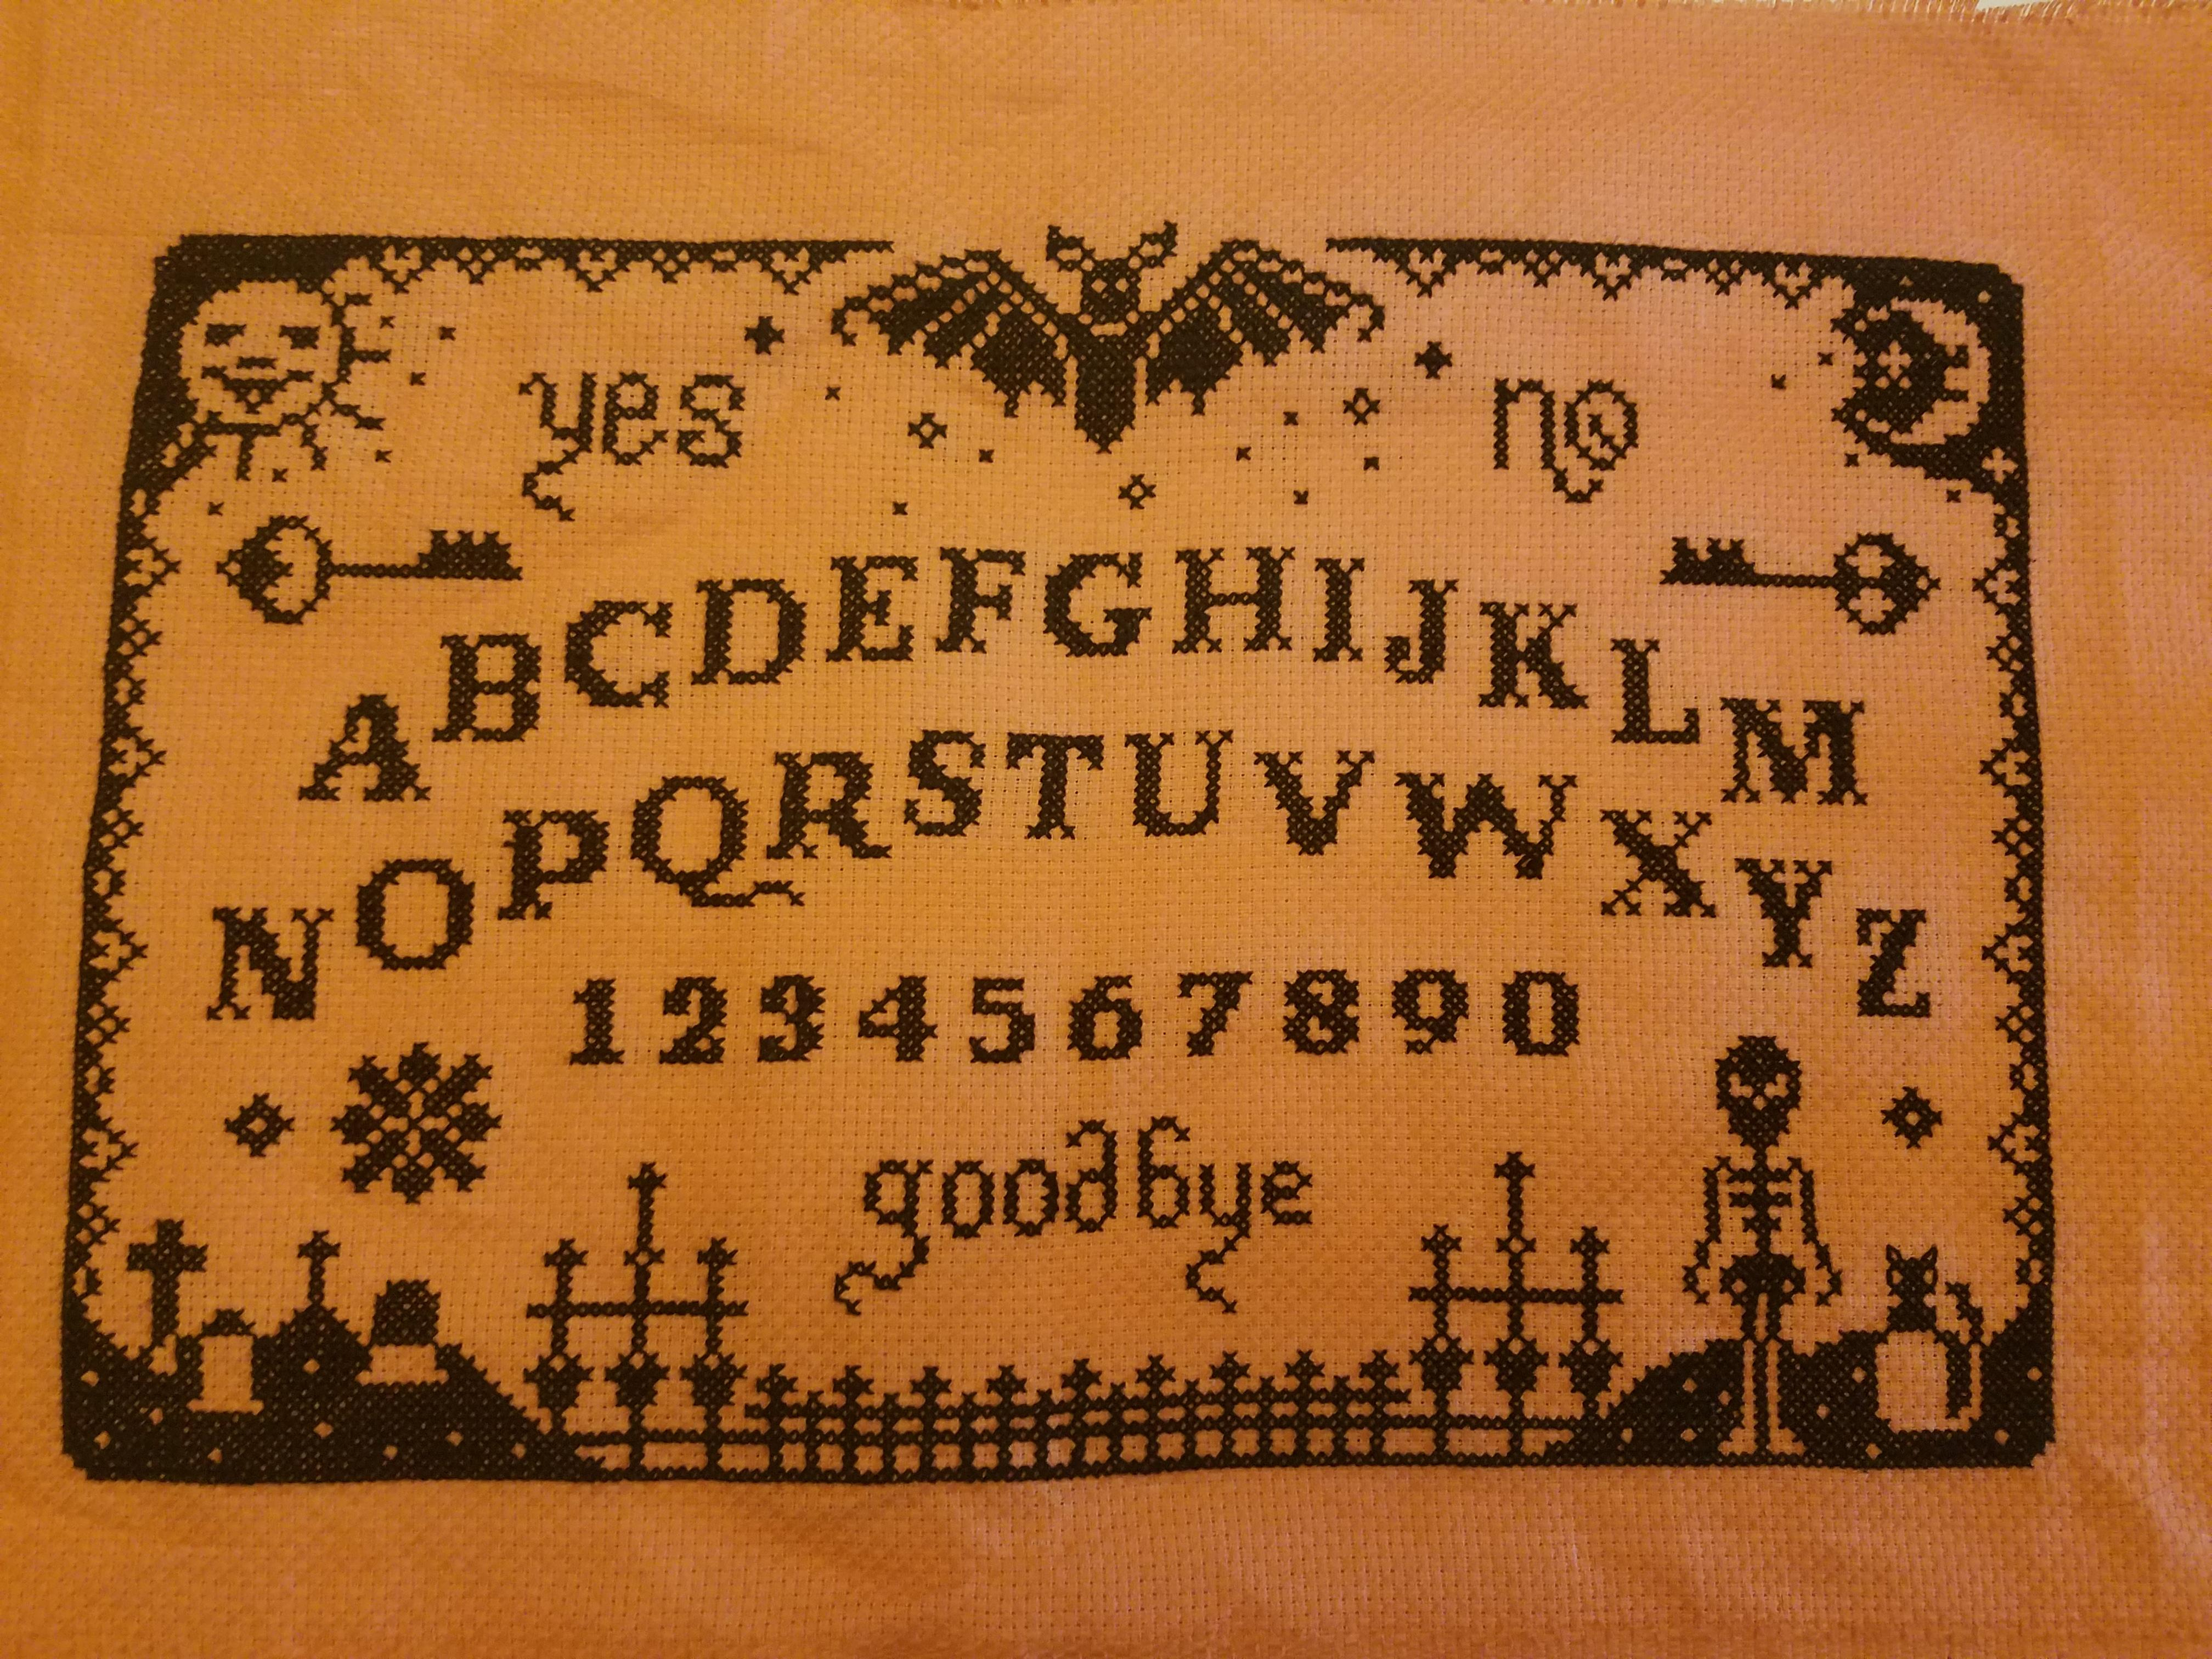 Primitive Embroidery Patterns Free Fo After About Two Months I Finally Finished This Primitive Ouija